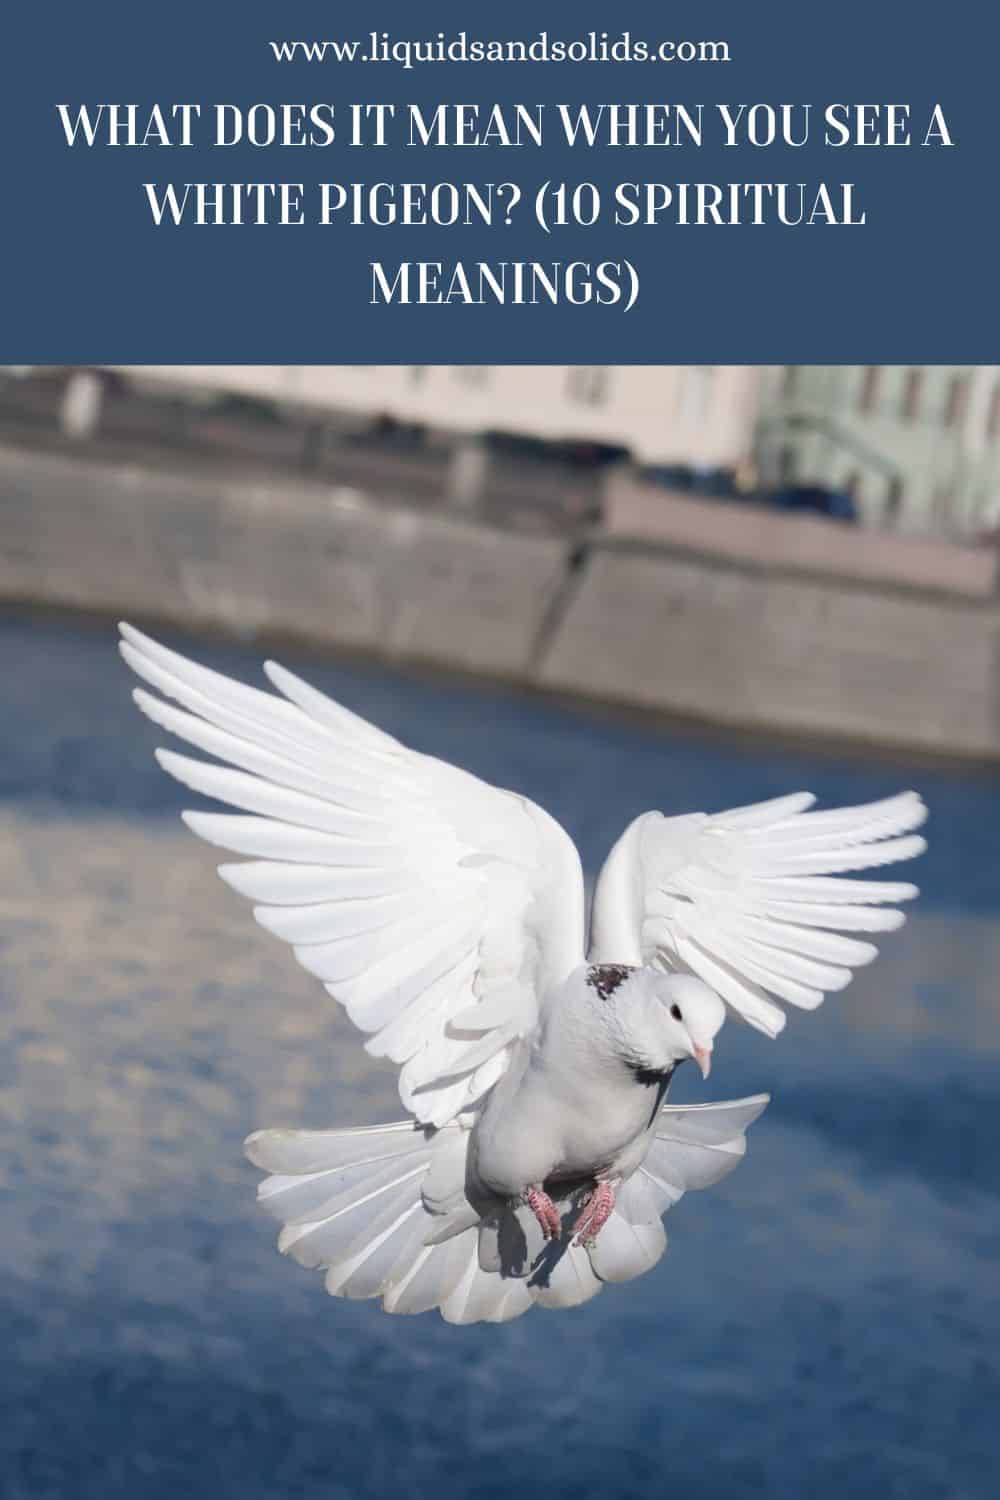 What Does It Mean When You See A White Pigeon? (10 Spiritual Meanings)